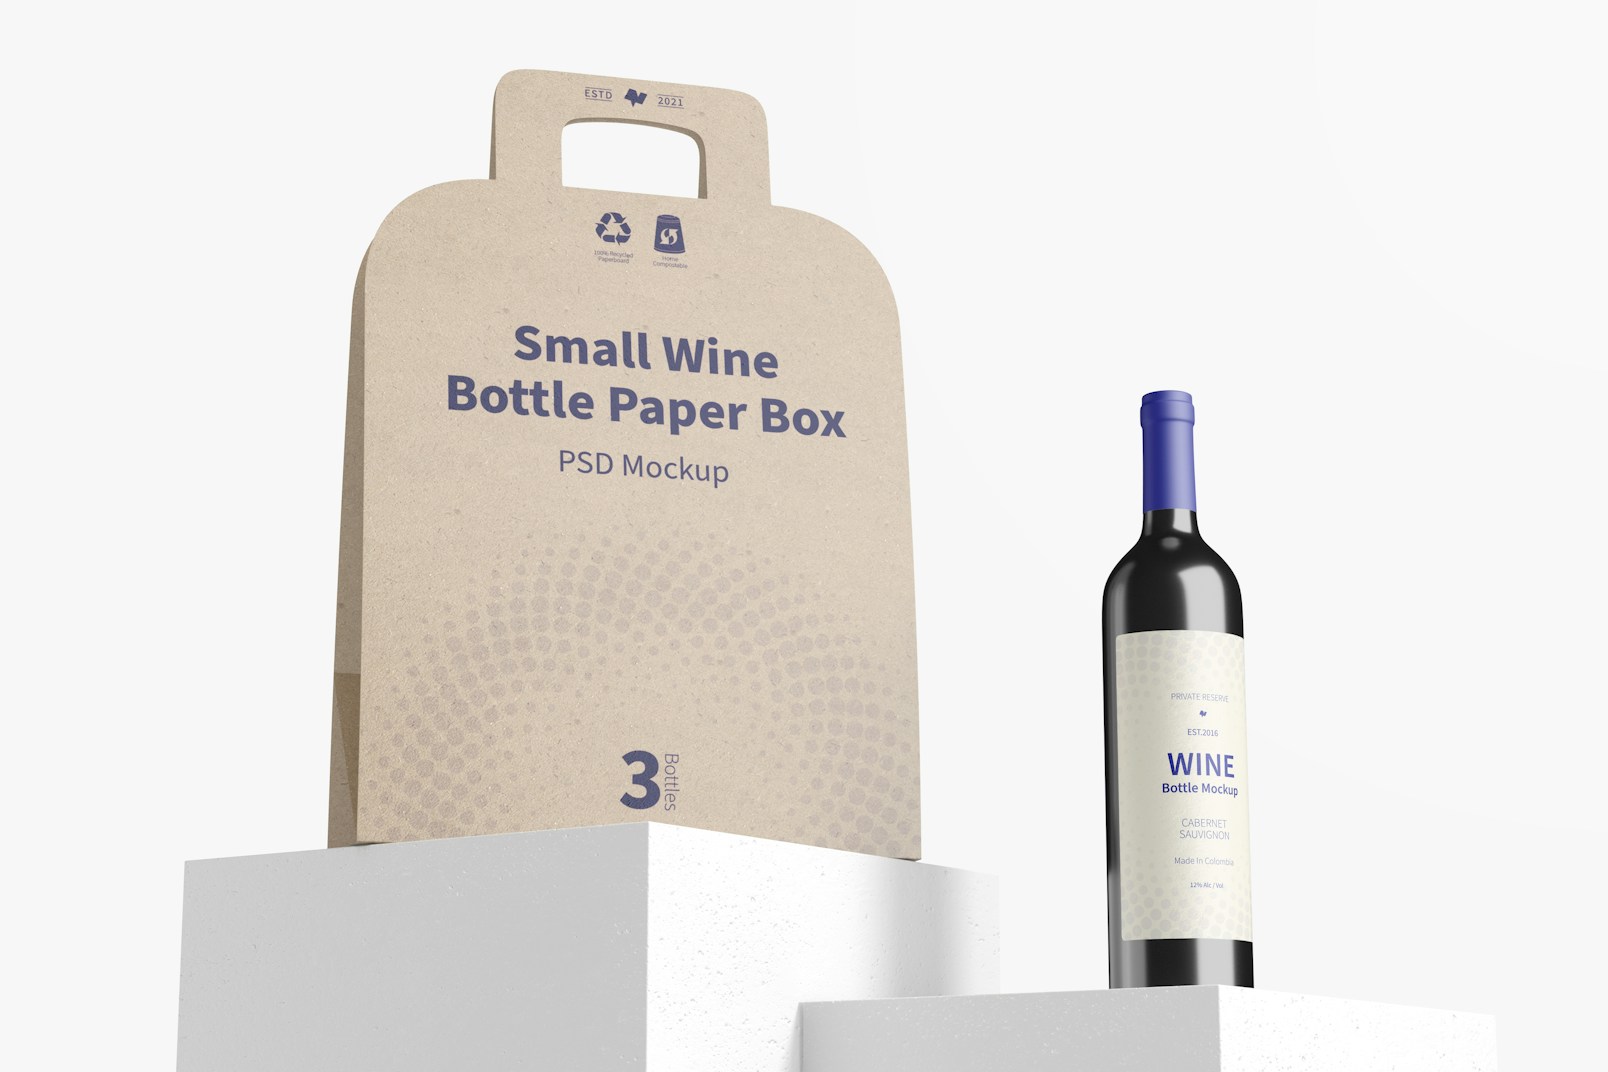 Small Wine Bottle Paper Box Mockup, Low Angle View